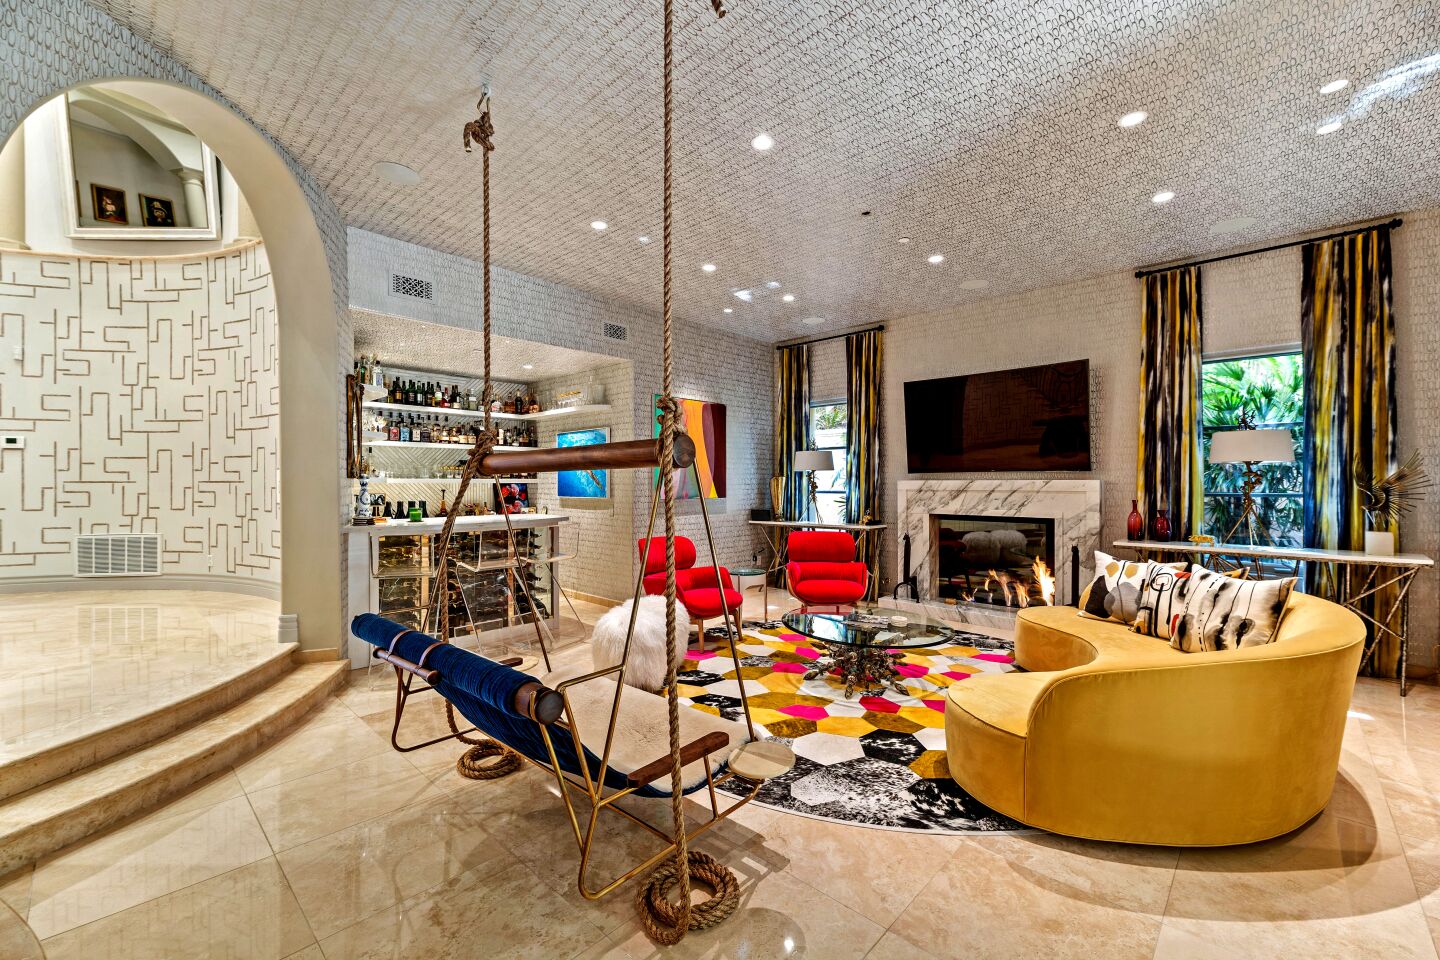 A swing-style seat is suspended from the ceiling in the family room of Cuoco's former home.